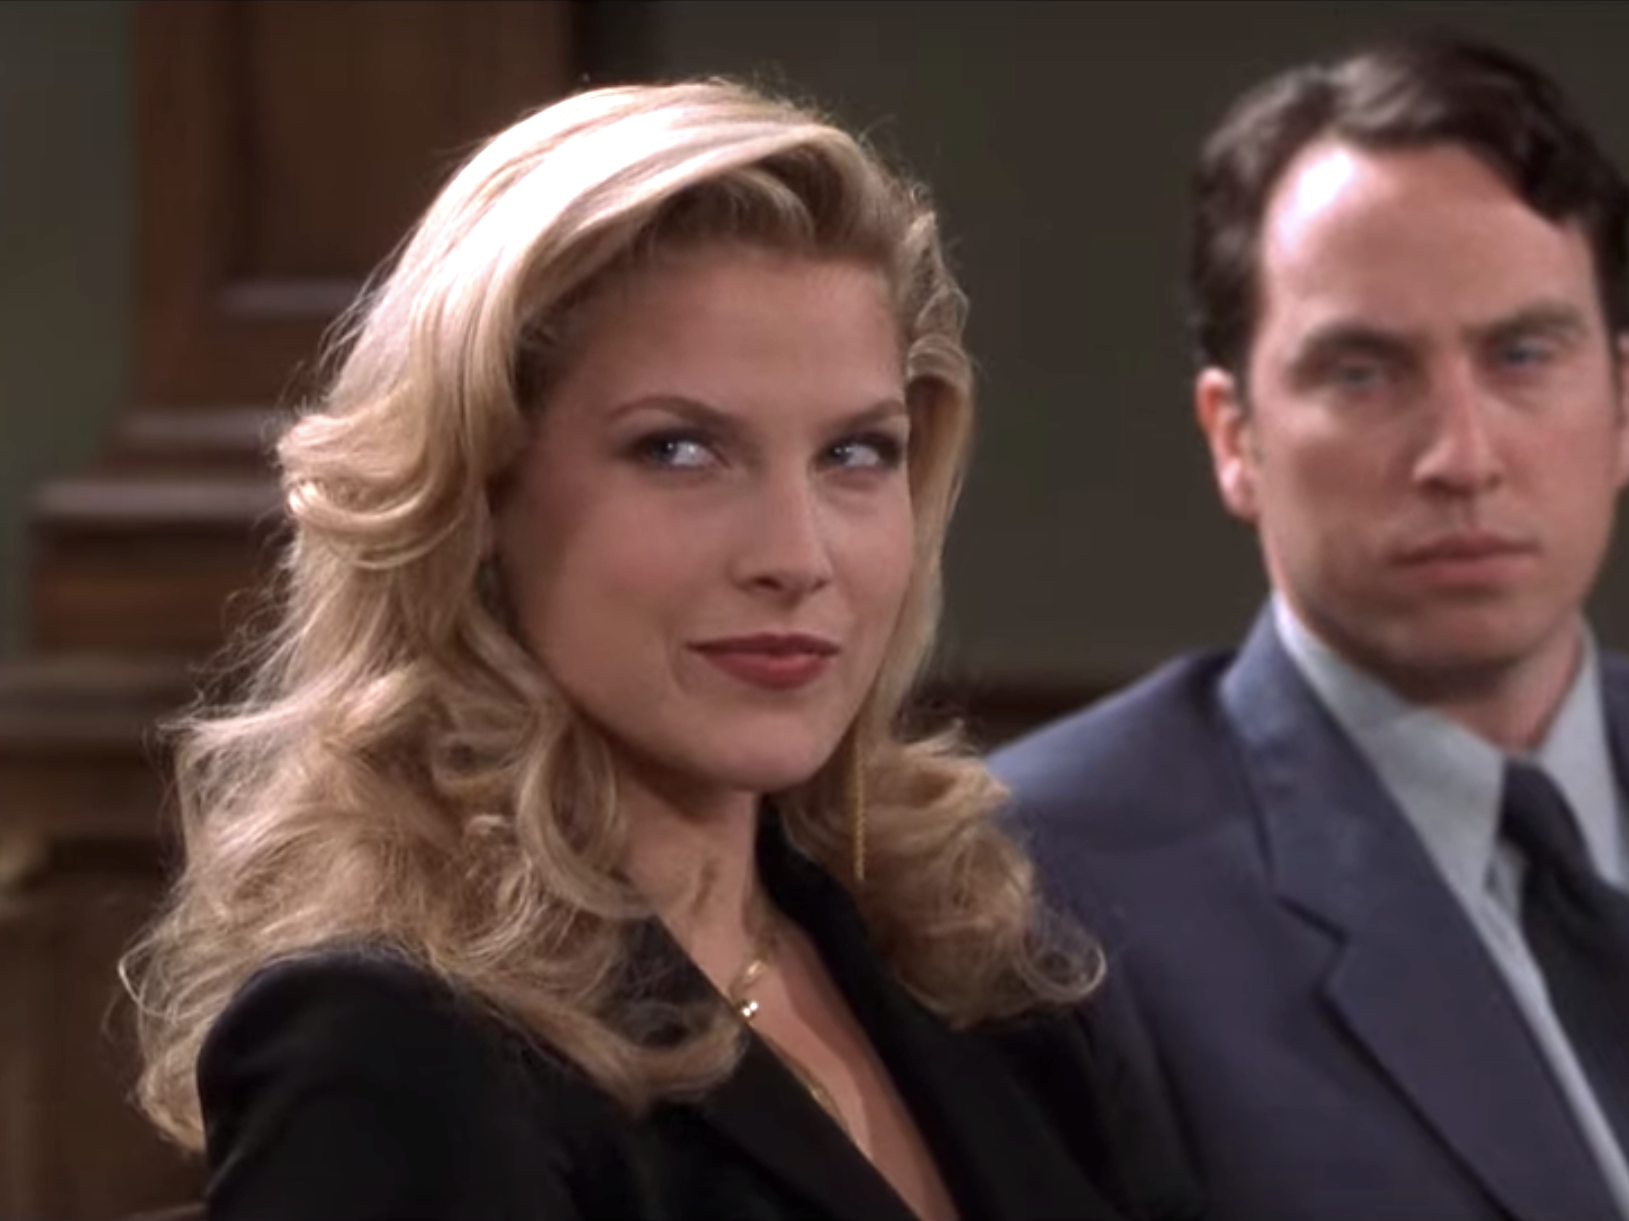 Ali Larter in a courtroom in "Legally Blonde."